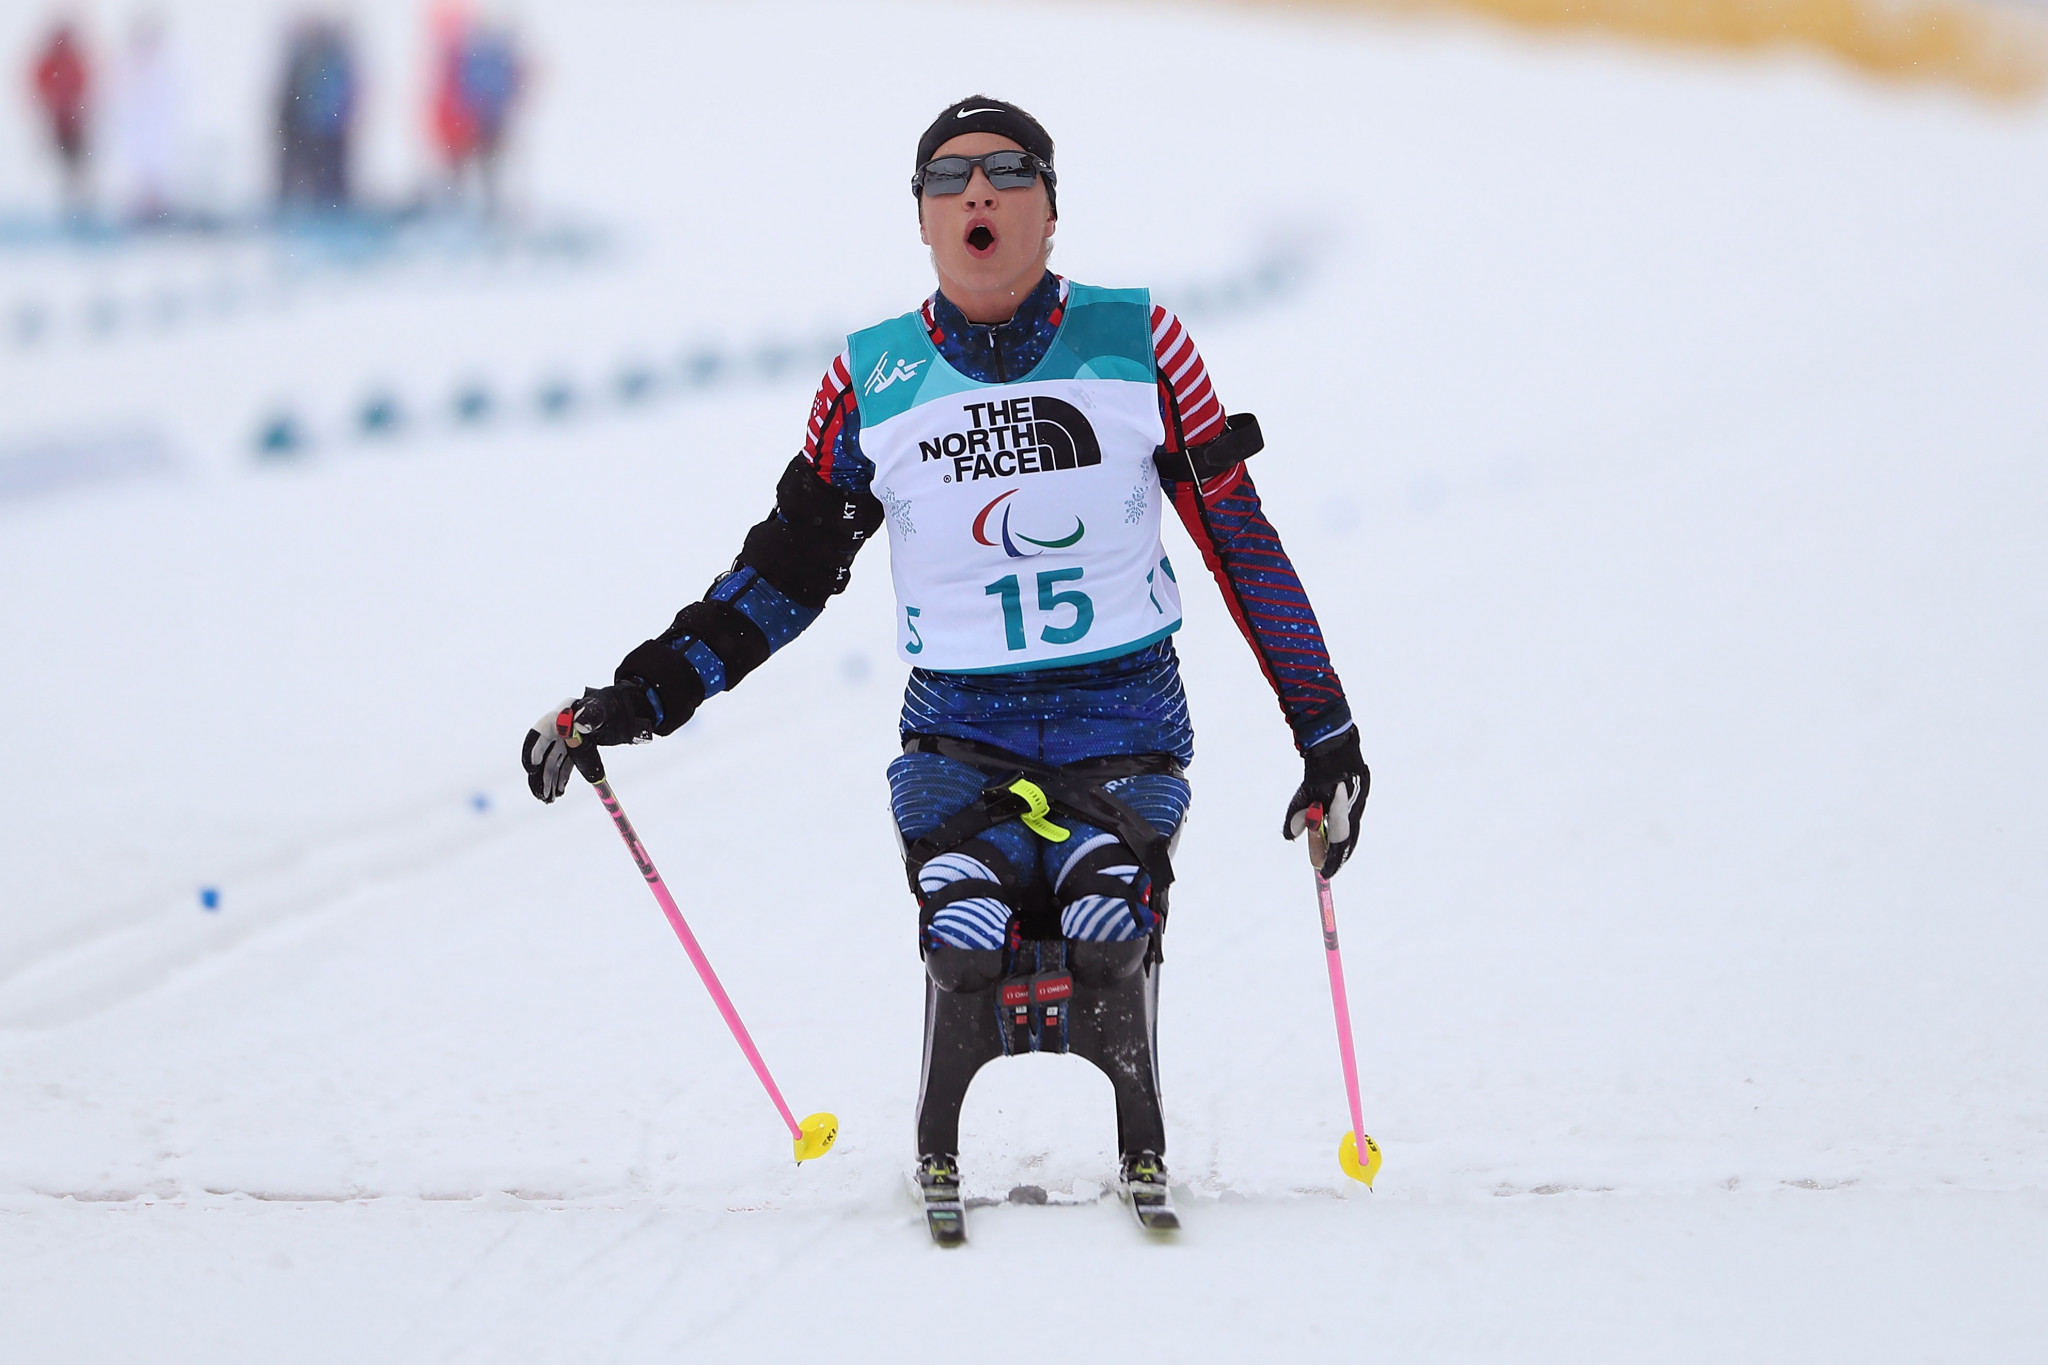 Masters wins on opening day of World Para Nordic Skiing World Cup season in Canmore